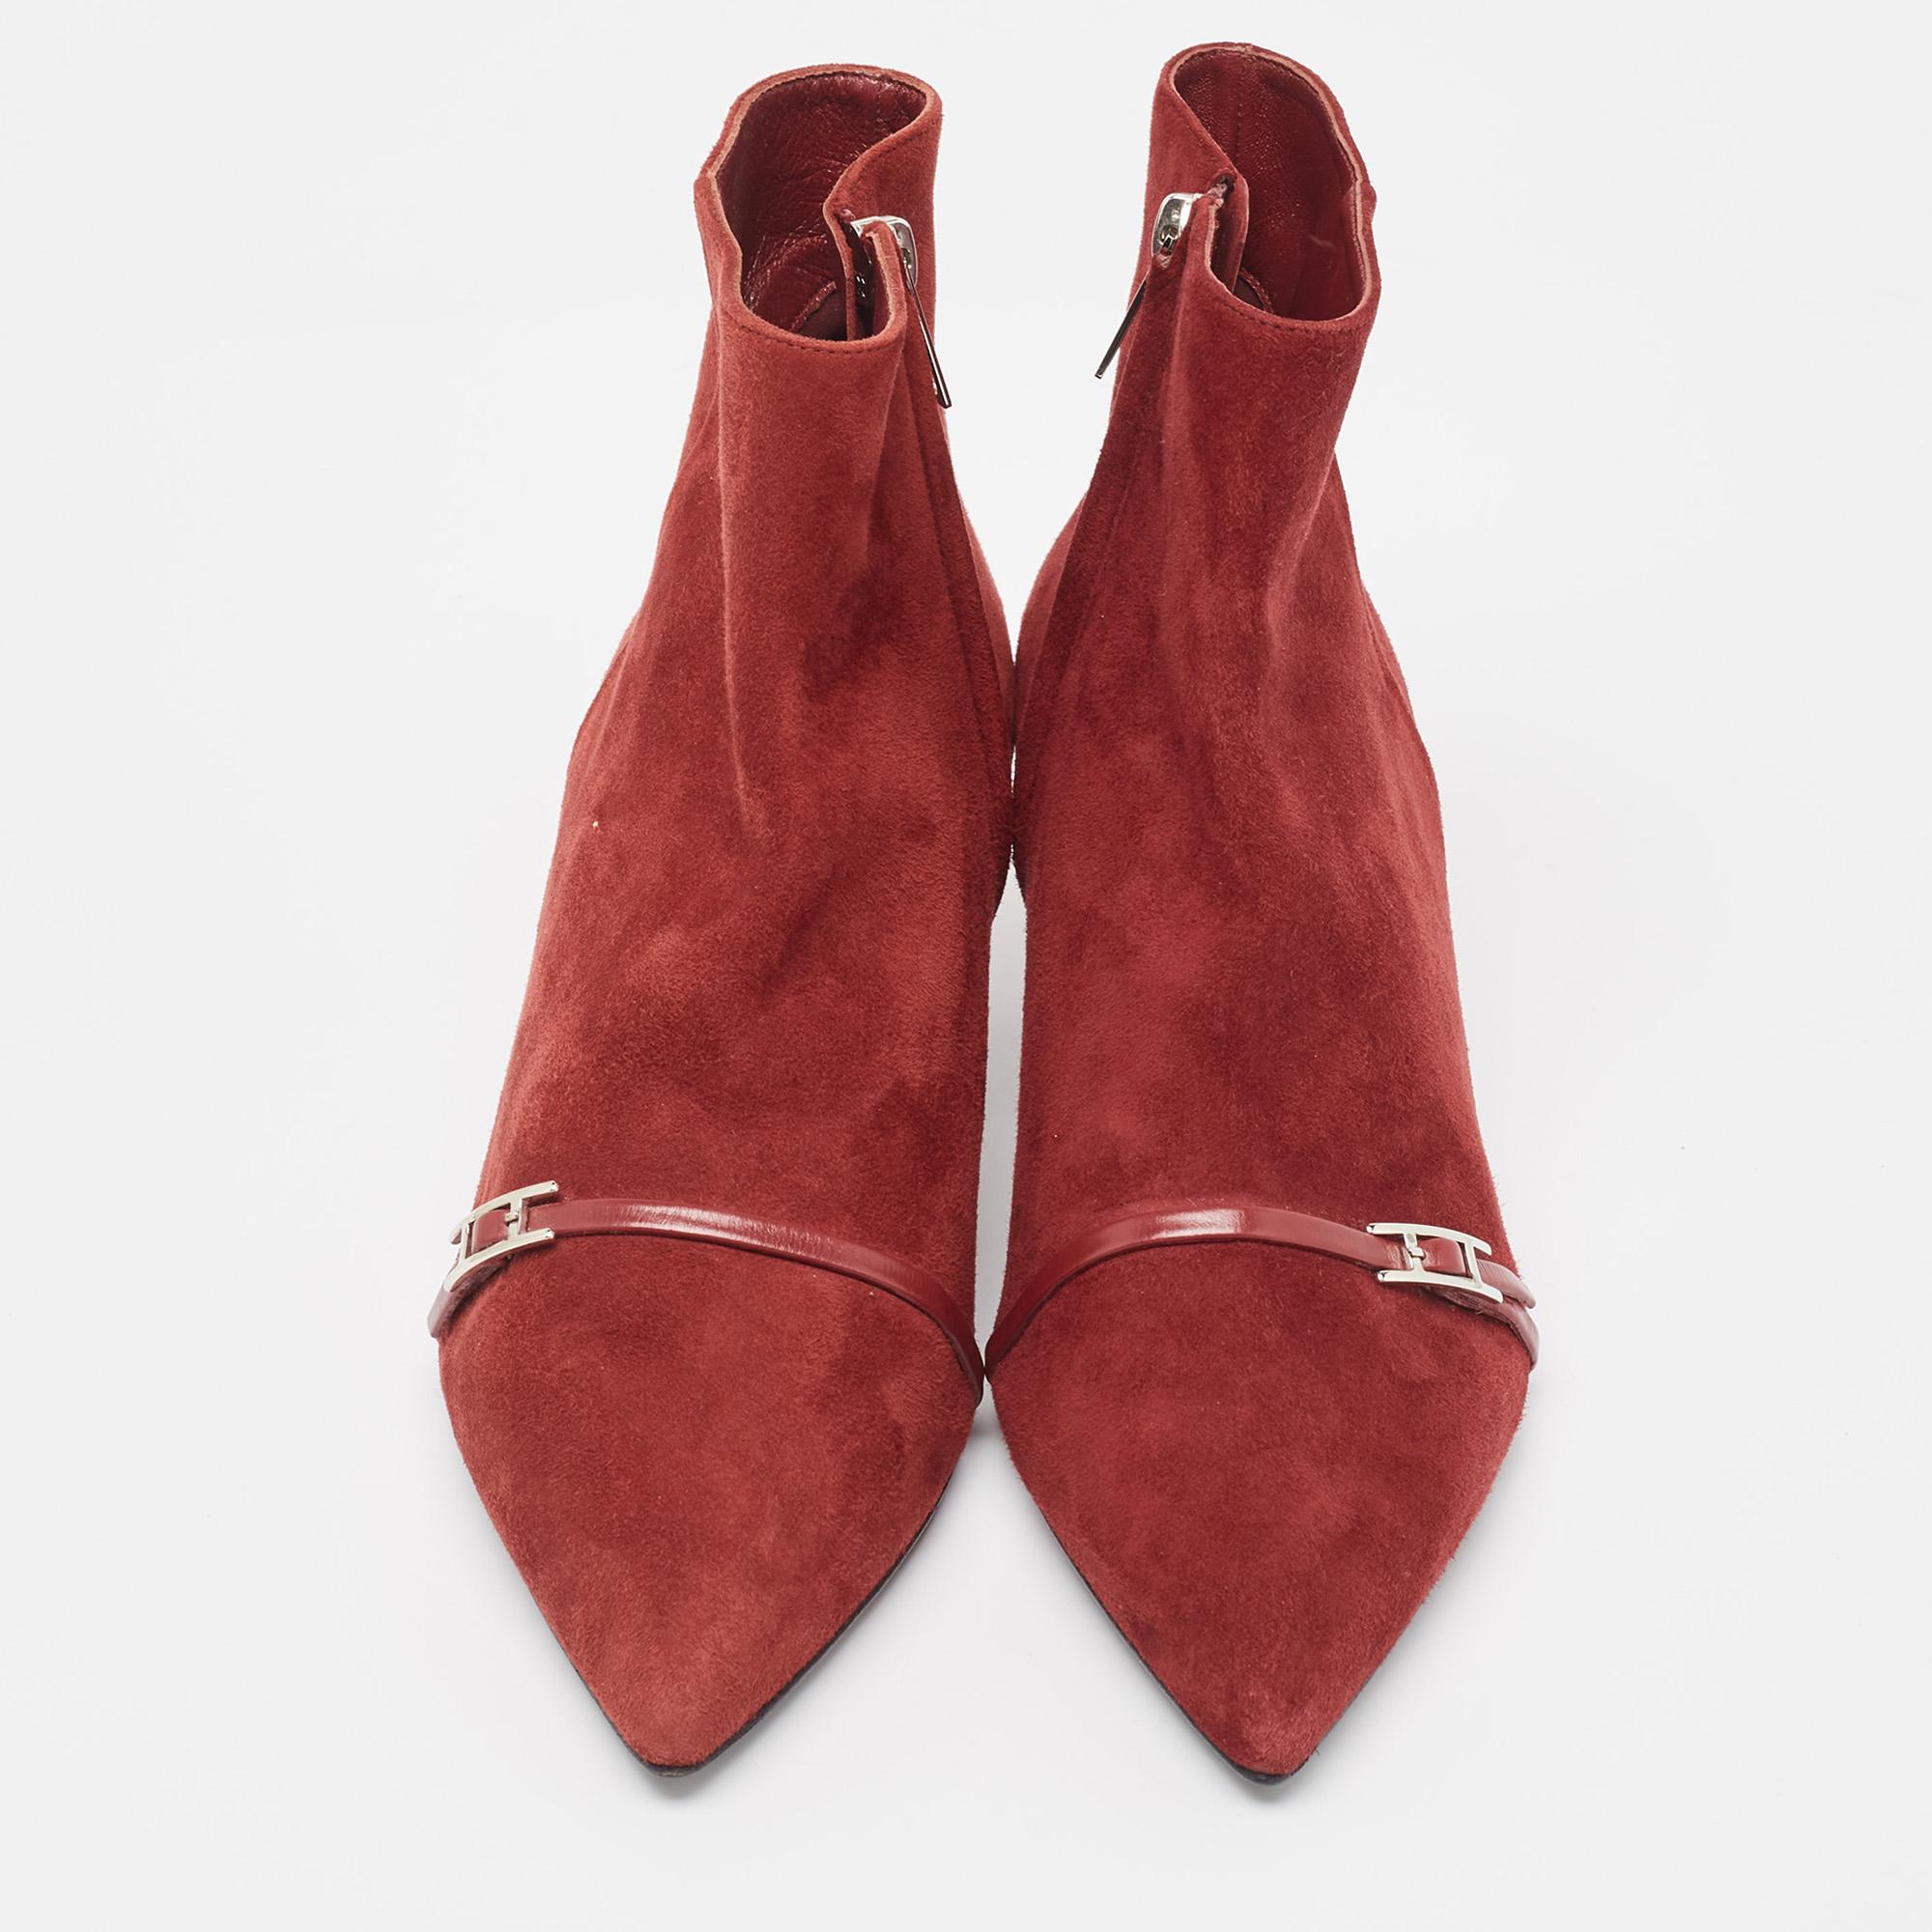 Women's Hermès Dark Red Suede Ankle Booties Size 38 For Sale